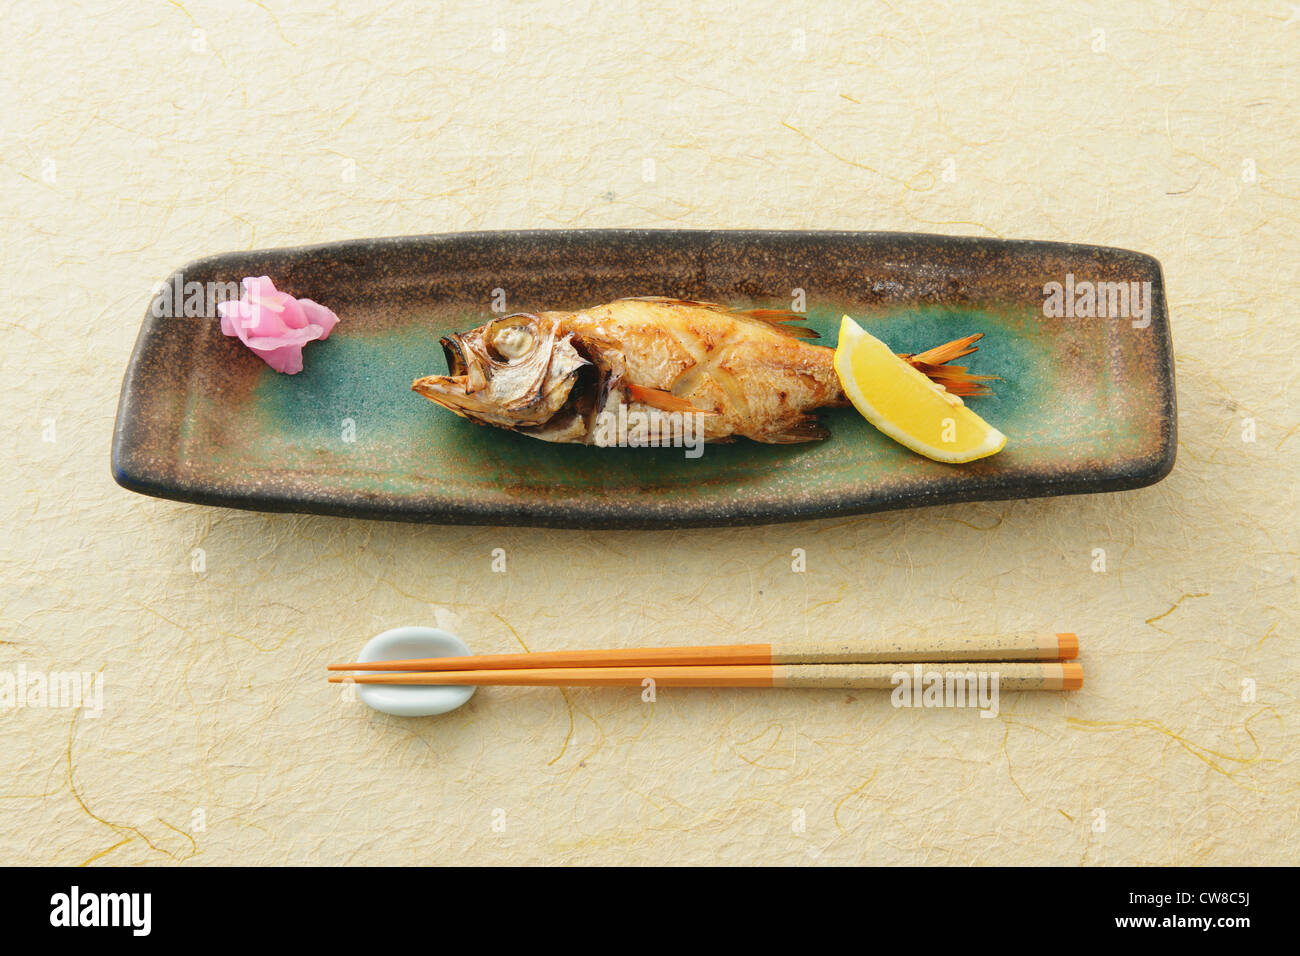 Fish On Tray With Chopstick Stock Photo